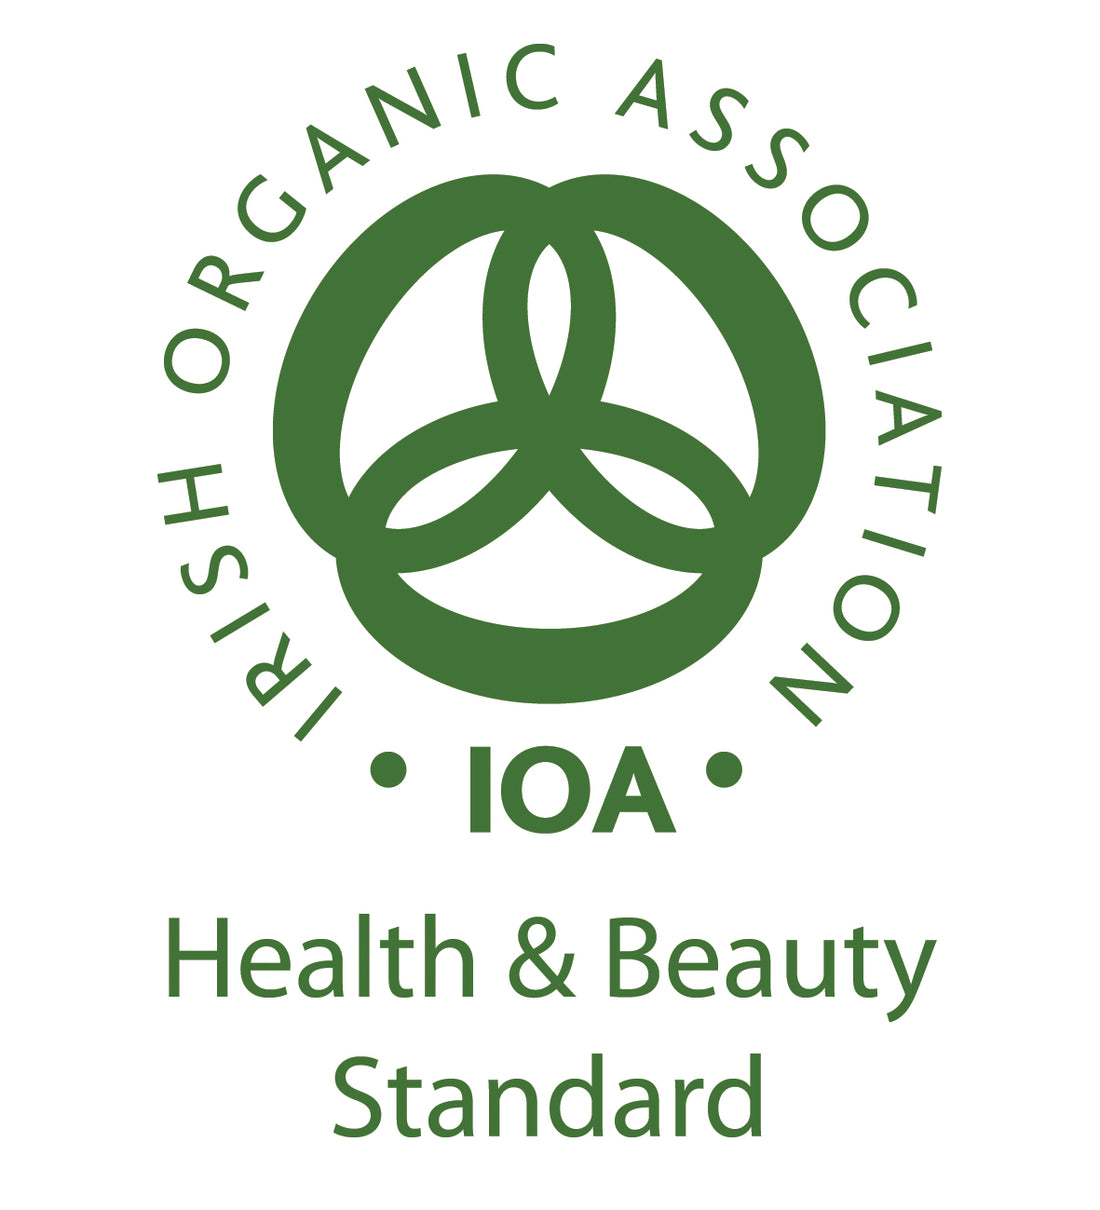 Organic certification and Sustainability